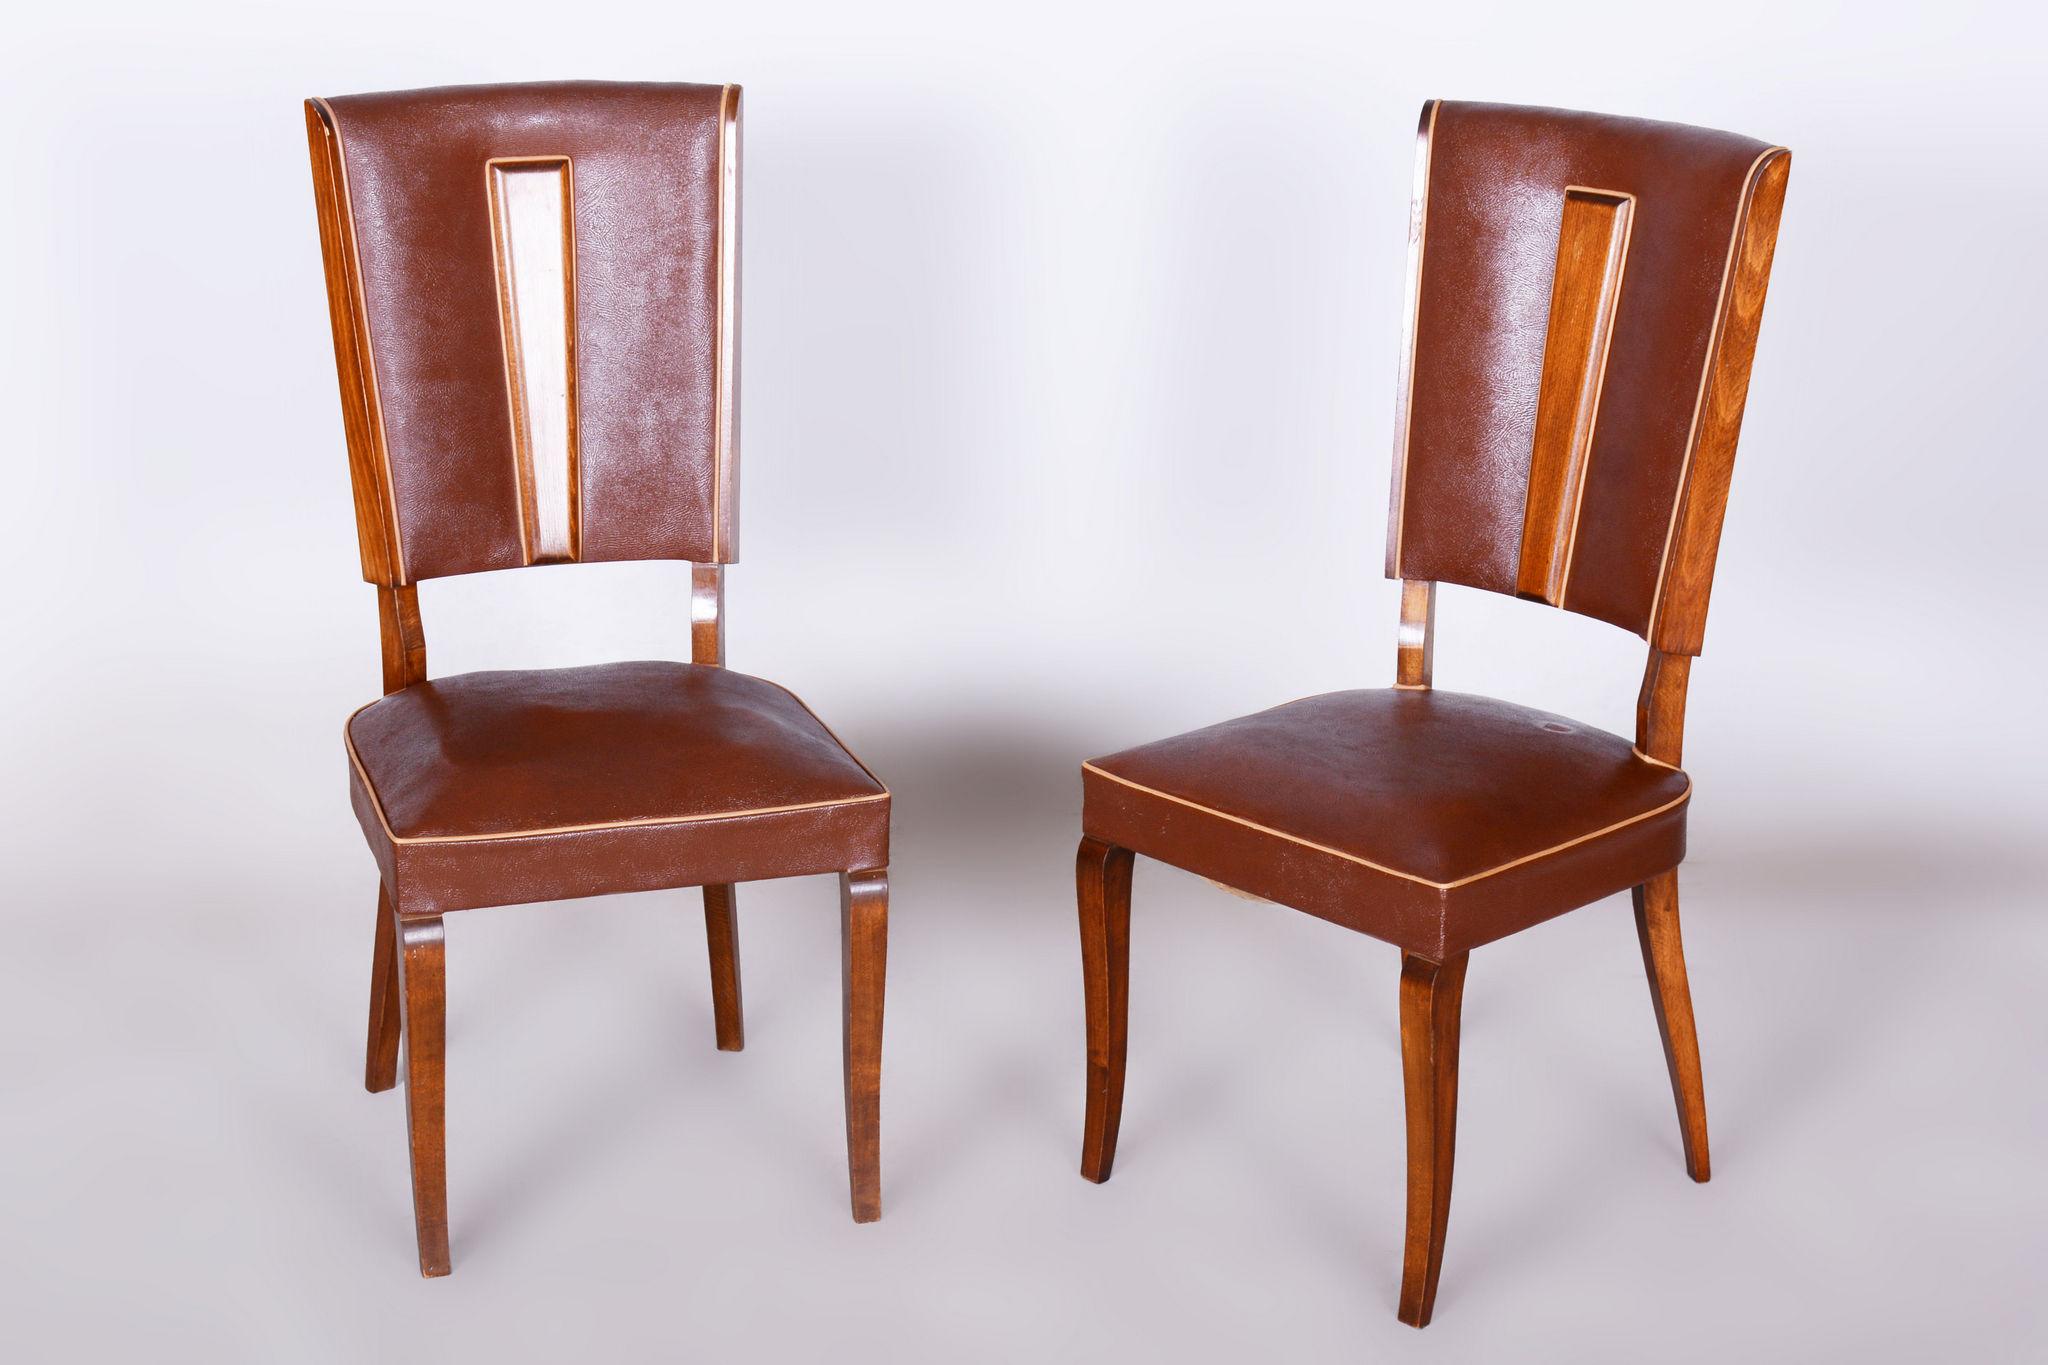 Pair of Original Art Deco Chairs, by Jules Leleu, Beech, France, 1920s For Sale 1